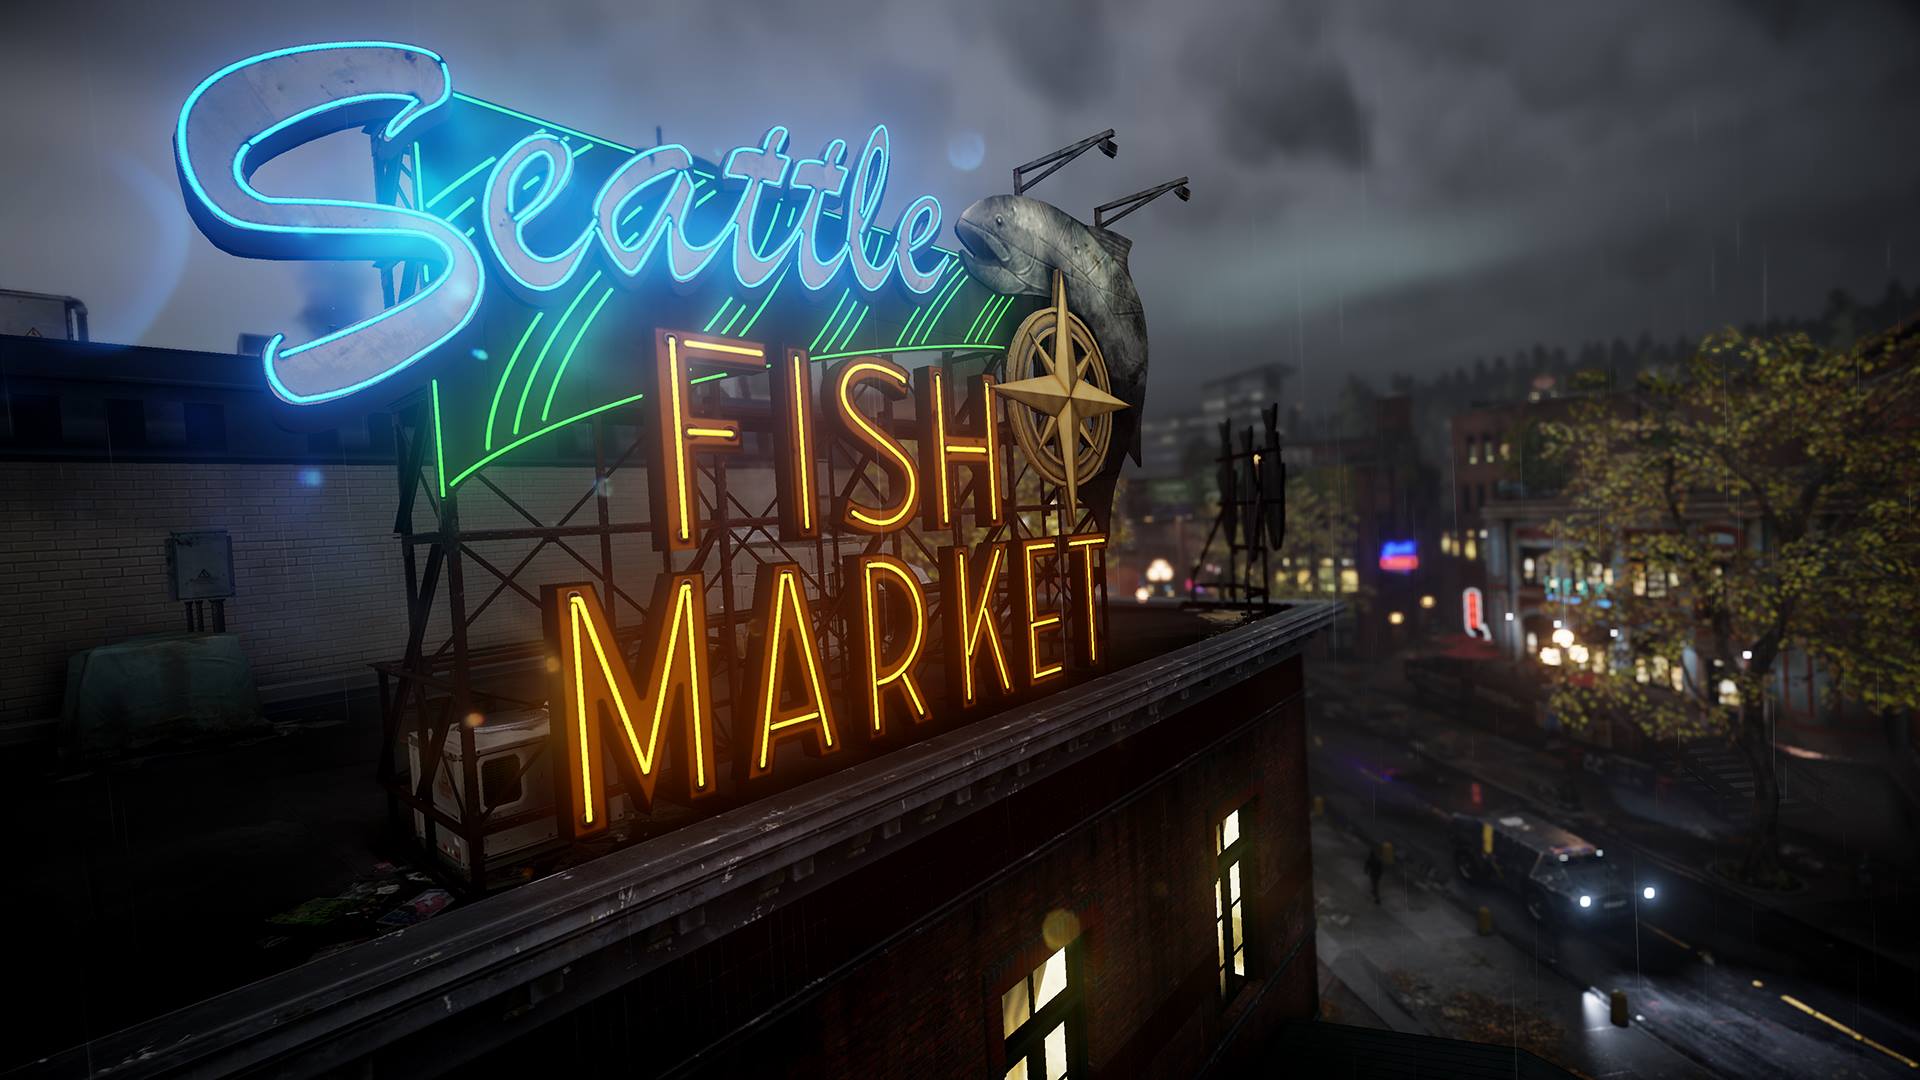 InFamous-Second-Son-Gets-New-Screenshots-Featuring-Seattle-Landmarks-424982-3.jpg